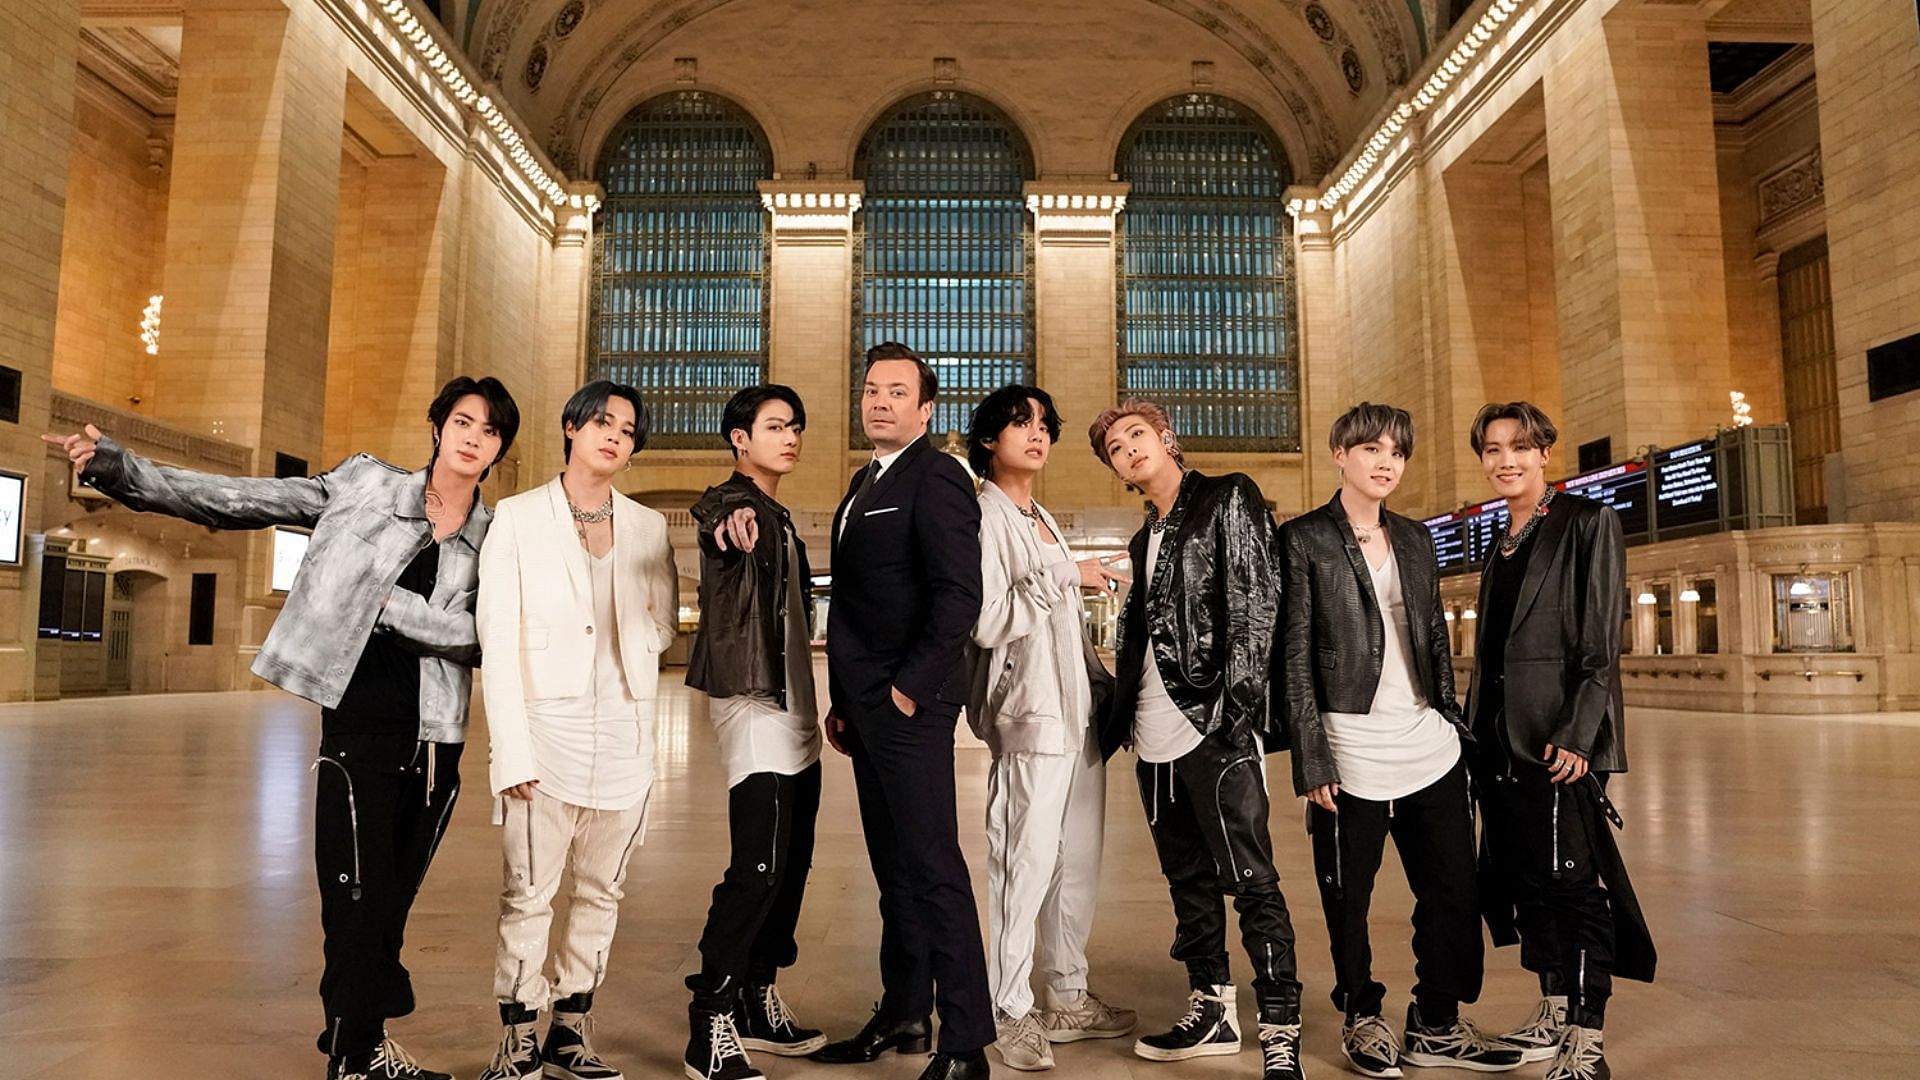 K-pop group, BTS and Jimmy Fallon at the Grand Central Station (Image via Getty Images)